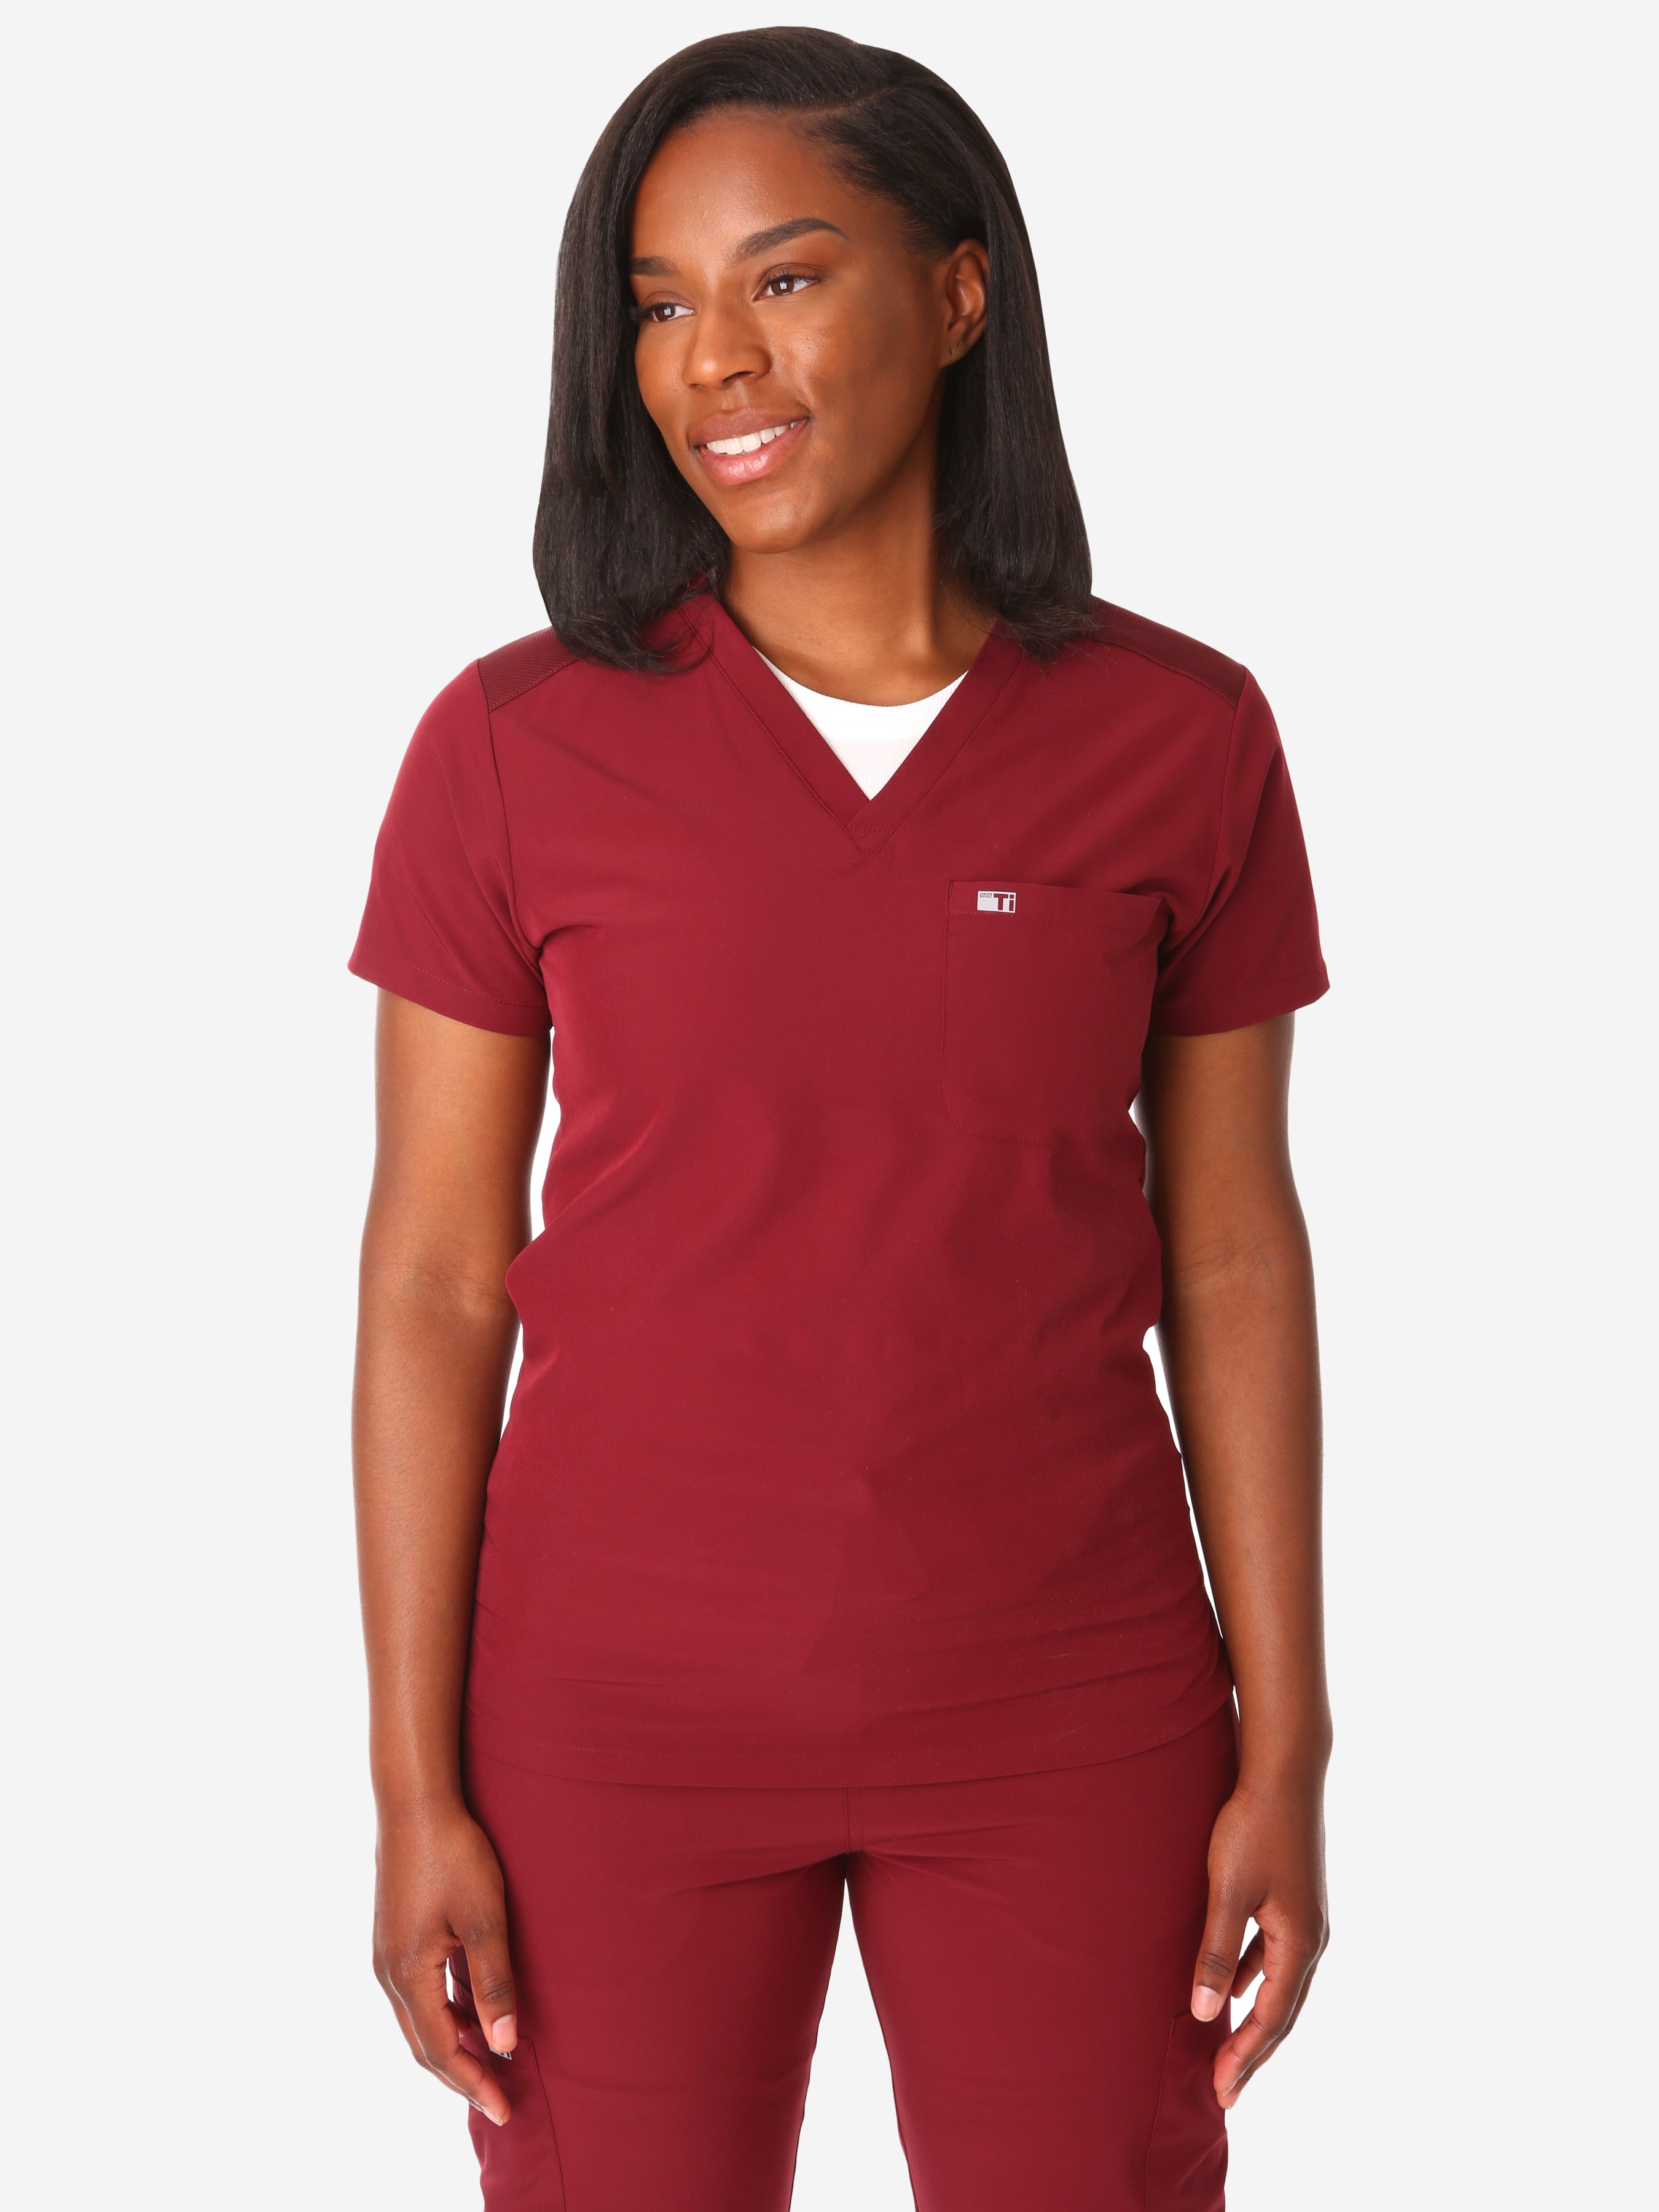 TiScrubs Women's Stretch Bold Burgundy One-Pocket Tuckable Scrub Top Untucked  Top Only Front